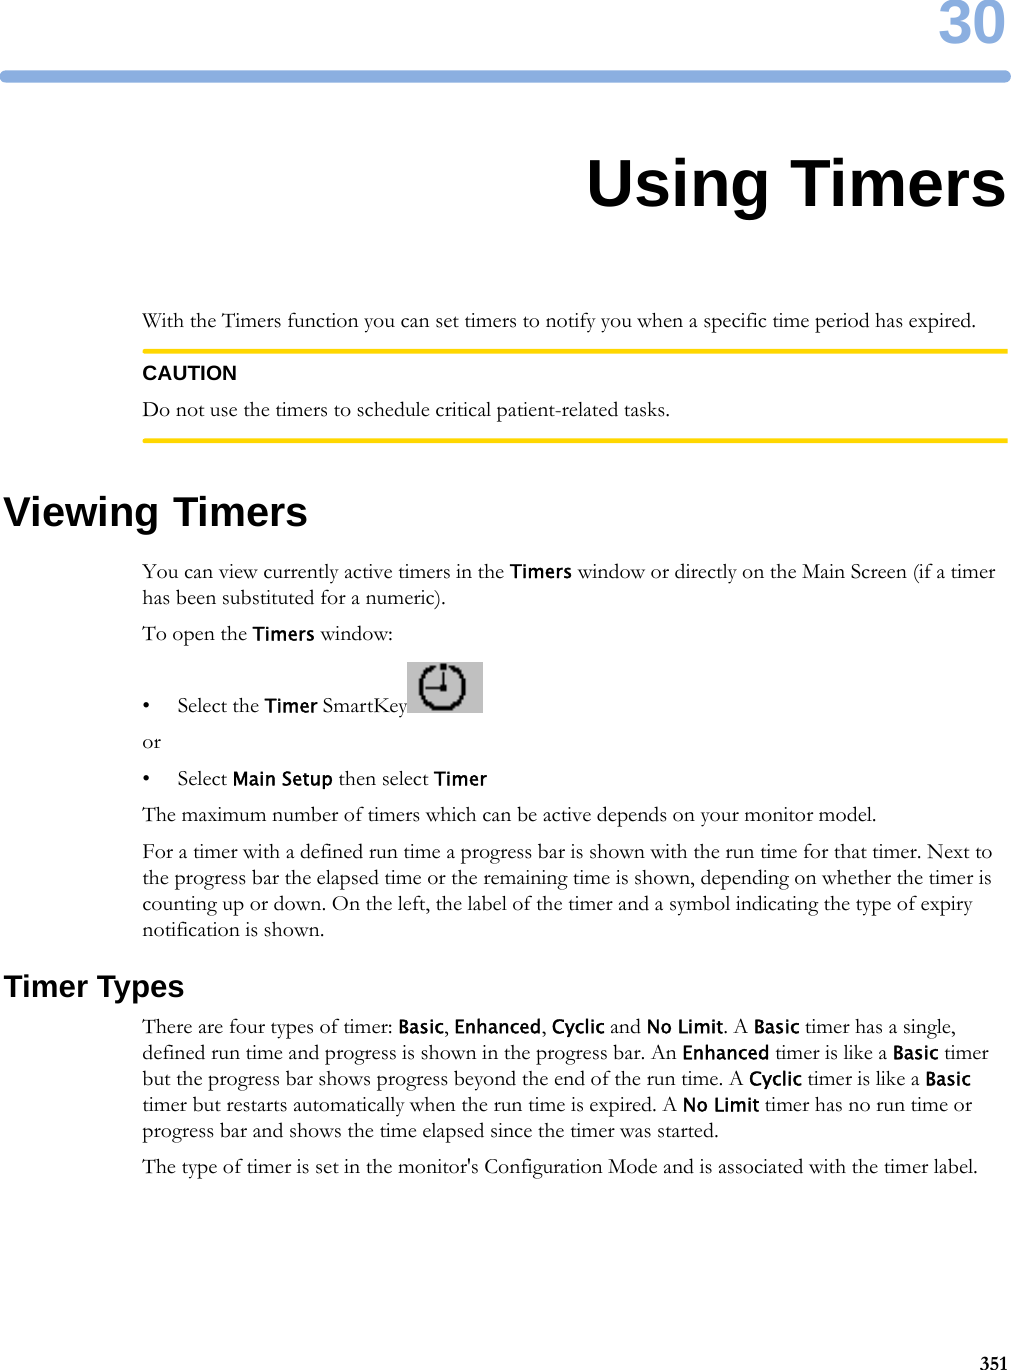 3035130Using TimersWith the Timers function you can set timers to notify you when a specific time period has expired.CAUTIONDo not use the timers to schedule critical patient-related tasks.Viewing TimersYou can view currently active timers in the Timers window or directly on the Main Screen (if a timer has been substituted for a numeric).To open the Timers window:• Select the Timer SmartKeyor•Select Main Setup then select TimerThe maximum number of timers which can be active depends on your monitor model.For a timer with a defined run time a progress bar is shown with the run time for that timer. Next to the progress bar the elapsed time or the remaining time is shown, depending on whether the timer is counting up or down. On the left, the label of the timer and a symbol indicating the type of expiry notification is shown.Timer TypesThere are four types of timer: Basic, Enhanced, Cyclic and No Limit. A Basic timer has a single, defined run time and progress is shown in the progress bar. An Enhanced timer is like a Basic timer but the progress bar shows progress beyond the end of the run time. A Cyclic timer is like a Basic timer but restarts automatically when the run time is expired. A No Limit timer has no run time or progress bar and shows the time elapsed since the timer was started.The type of timer is set in the monitor&apos;s Configuration Mode and is associated with the timer label.